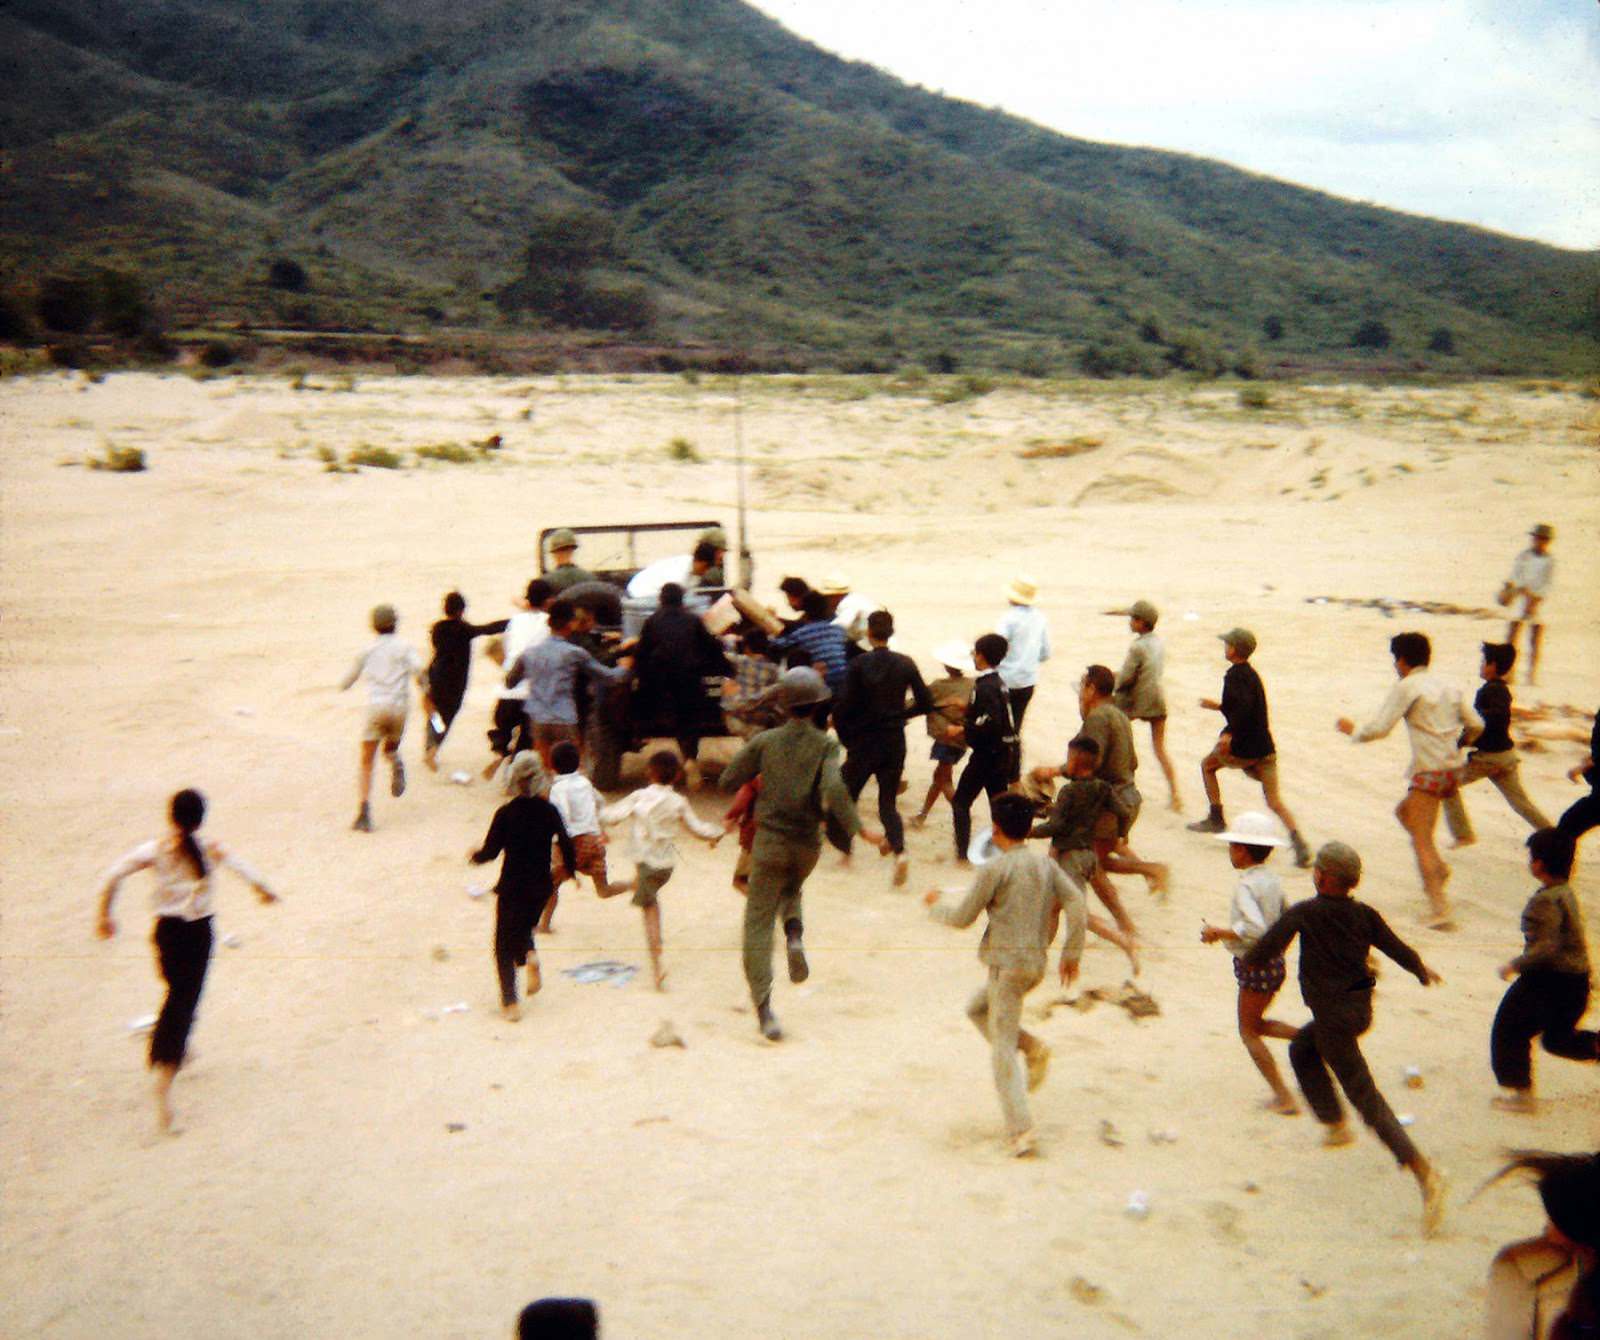 After filling sandbags for bunkers at a base camp by the South China Sea near Ninh Hoa, Vietnam. 1968.